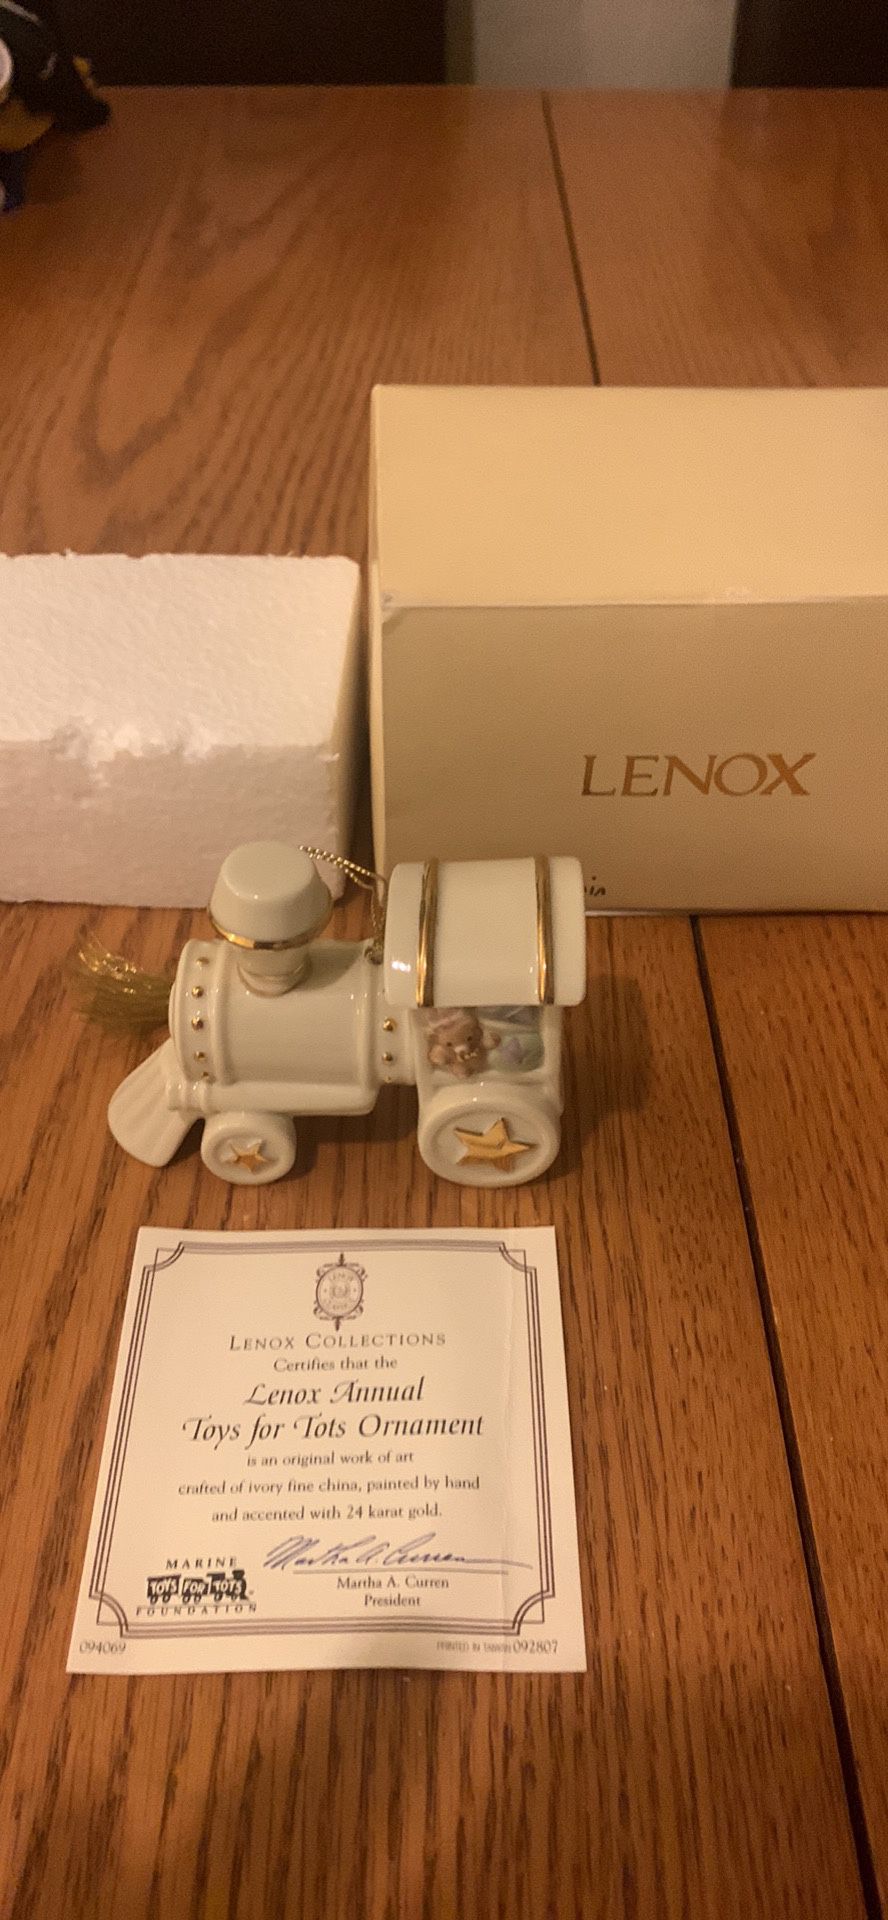 Lenox Marine Foundation Annual Toys for Tots Train Ornament w COA 2002 NIB took it out to take pictures